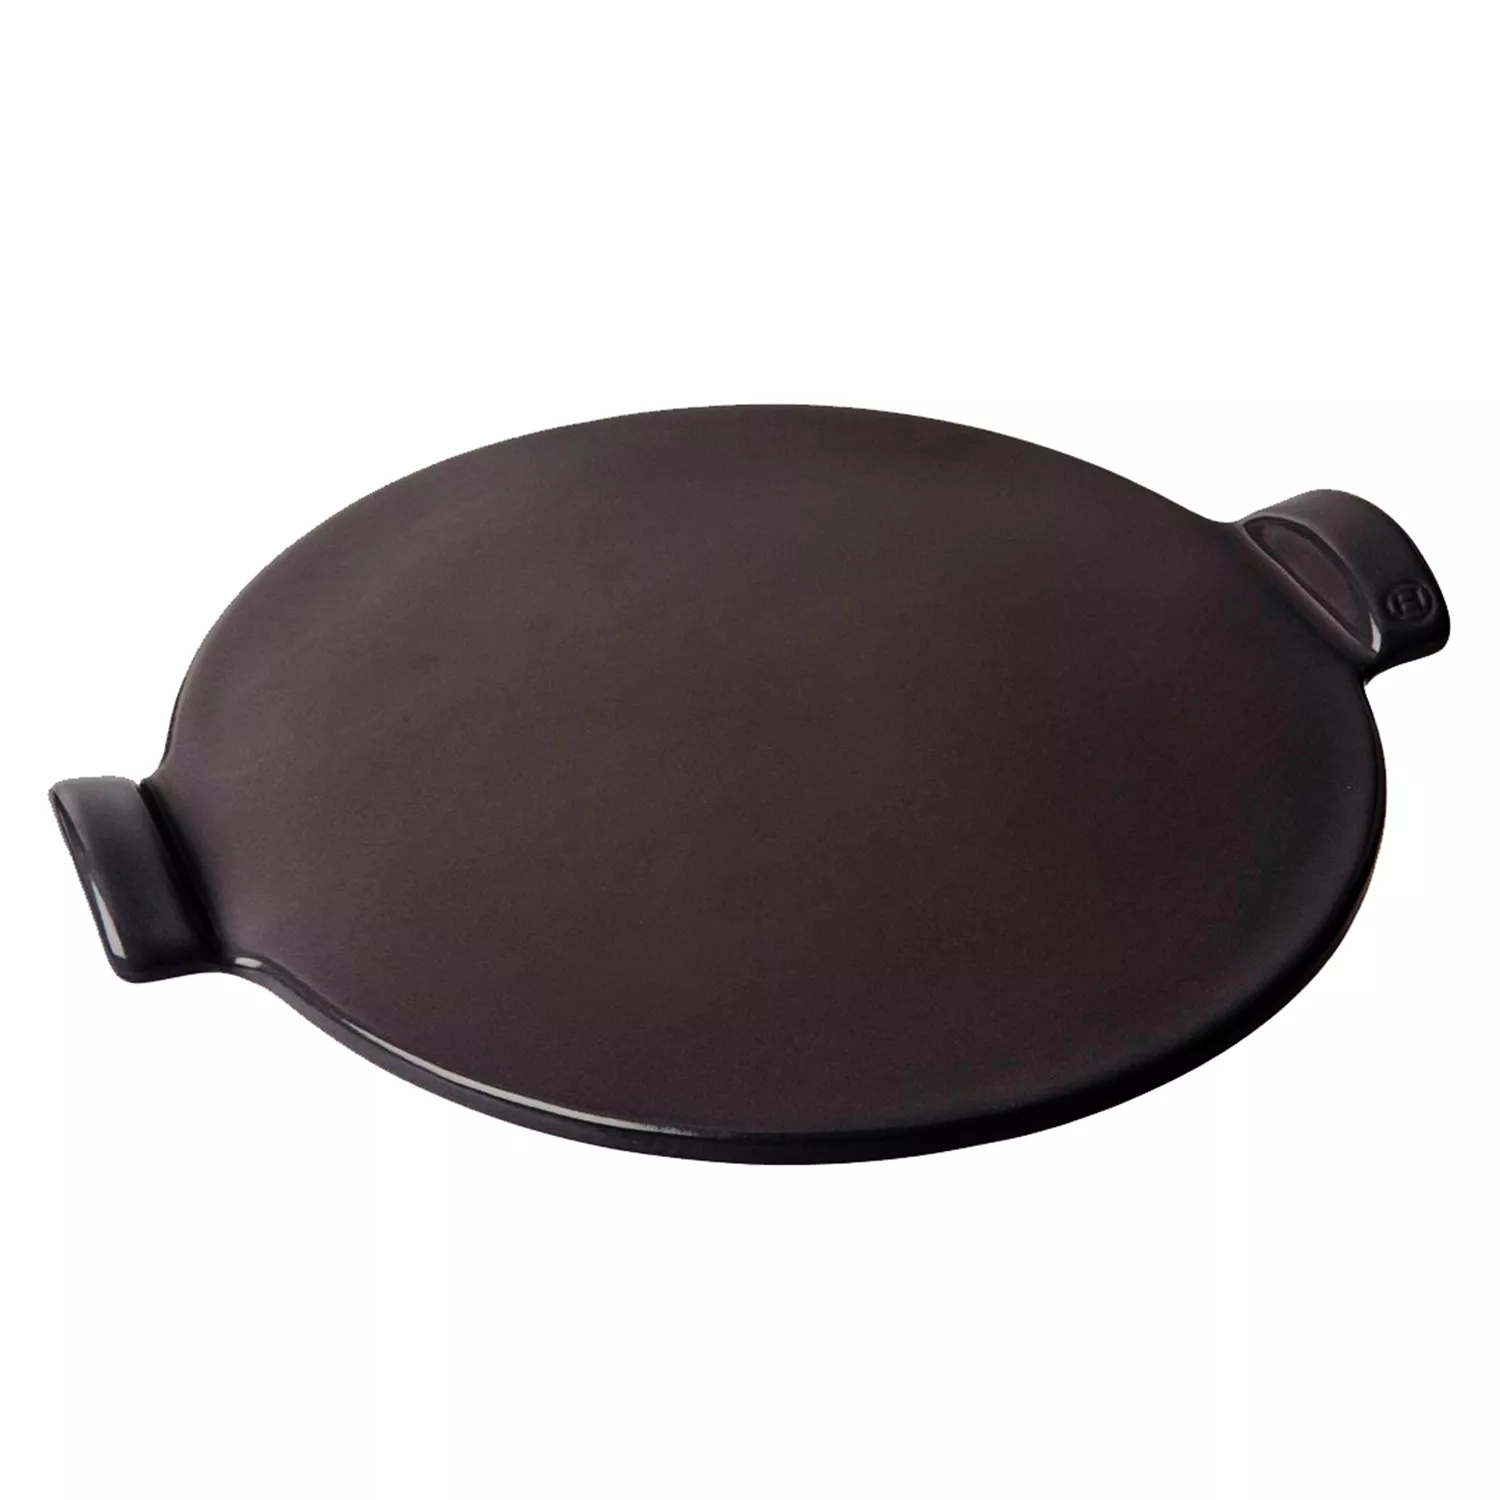 Emile Henry Made in France Flame Top Pizza Stone, Black. Perfect for Pizzas  or Breads. In the Oven, On Top of the BBQ. Safe up to 750 degrees F. 100%